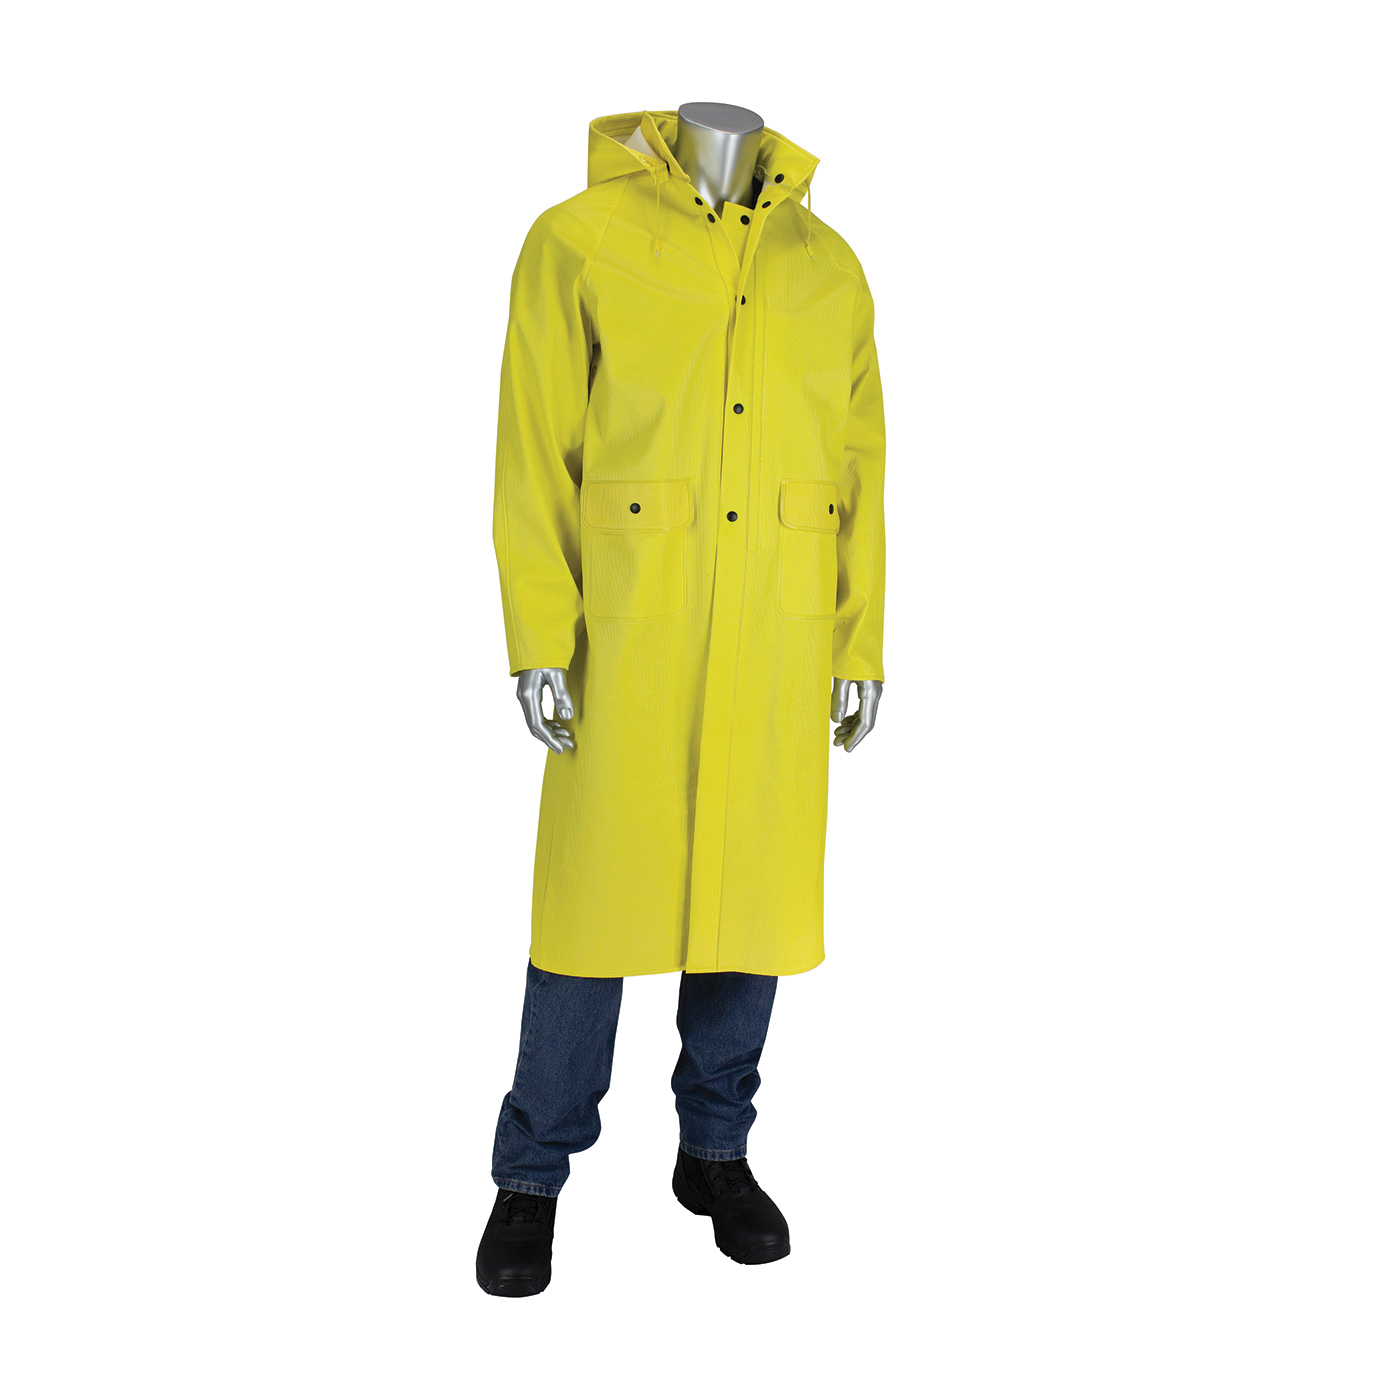 PIP® FALCON™ Flex™ 201-650C/L 2-Piece Ribbed Rain Jacket With Hood, L, Yellow, PVC/Non-Woven Polyester, Resists: Rips, Tear and Water